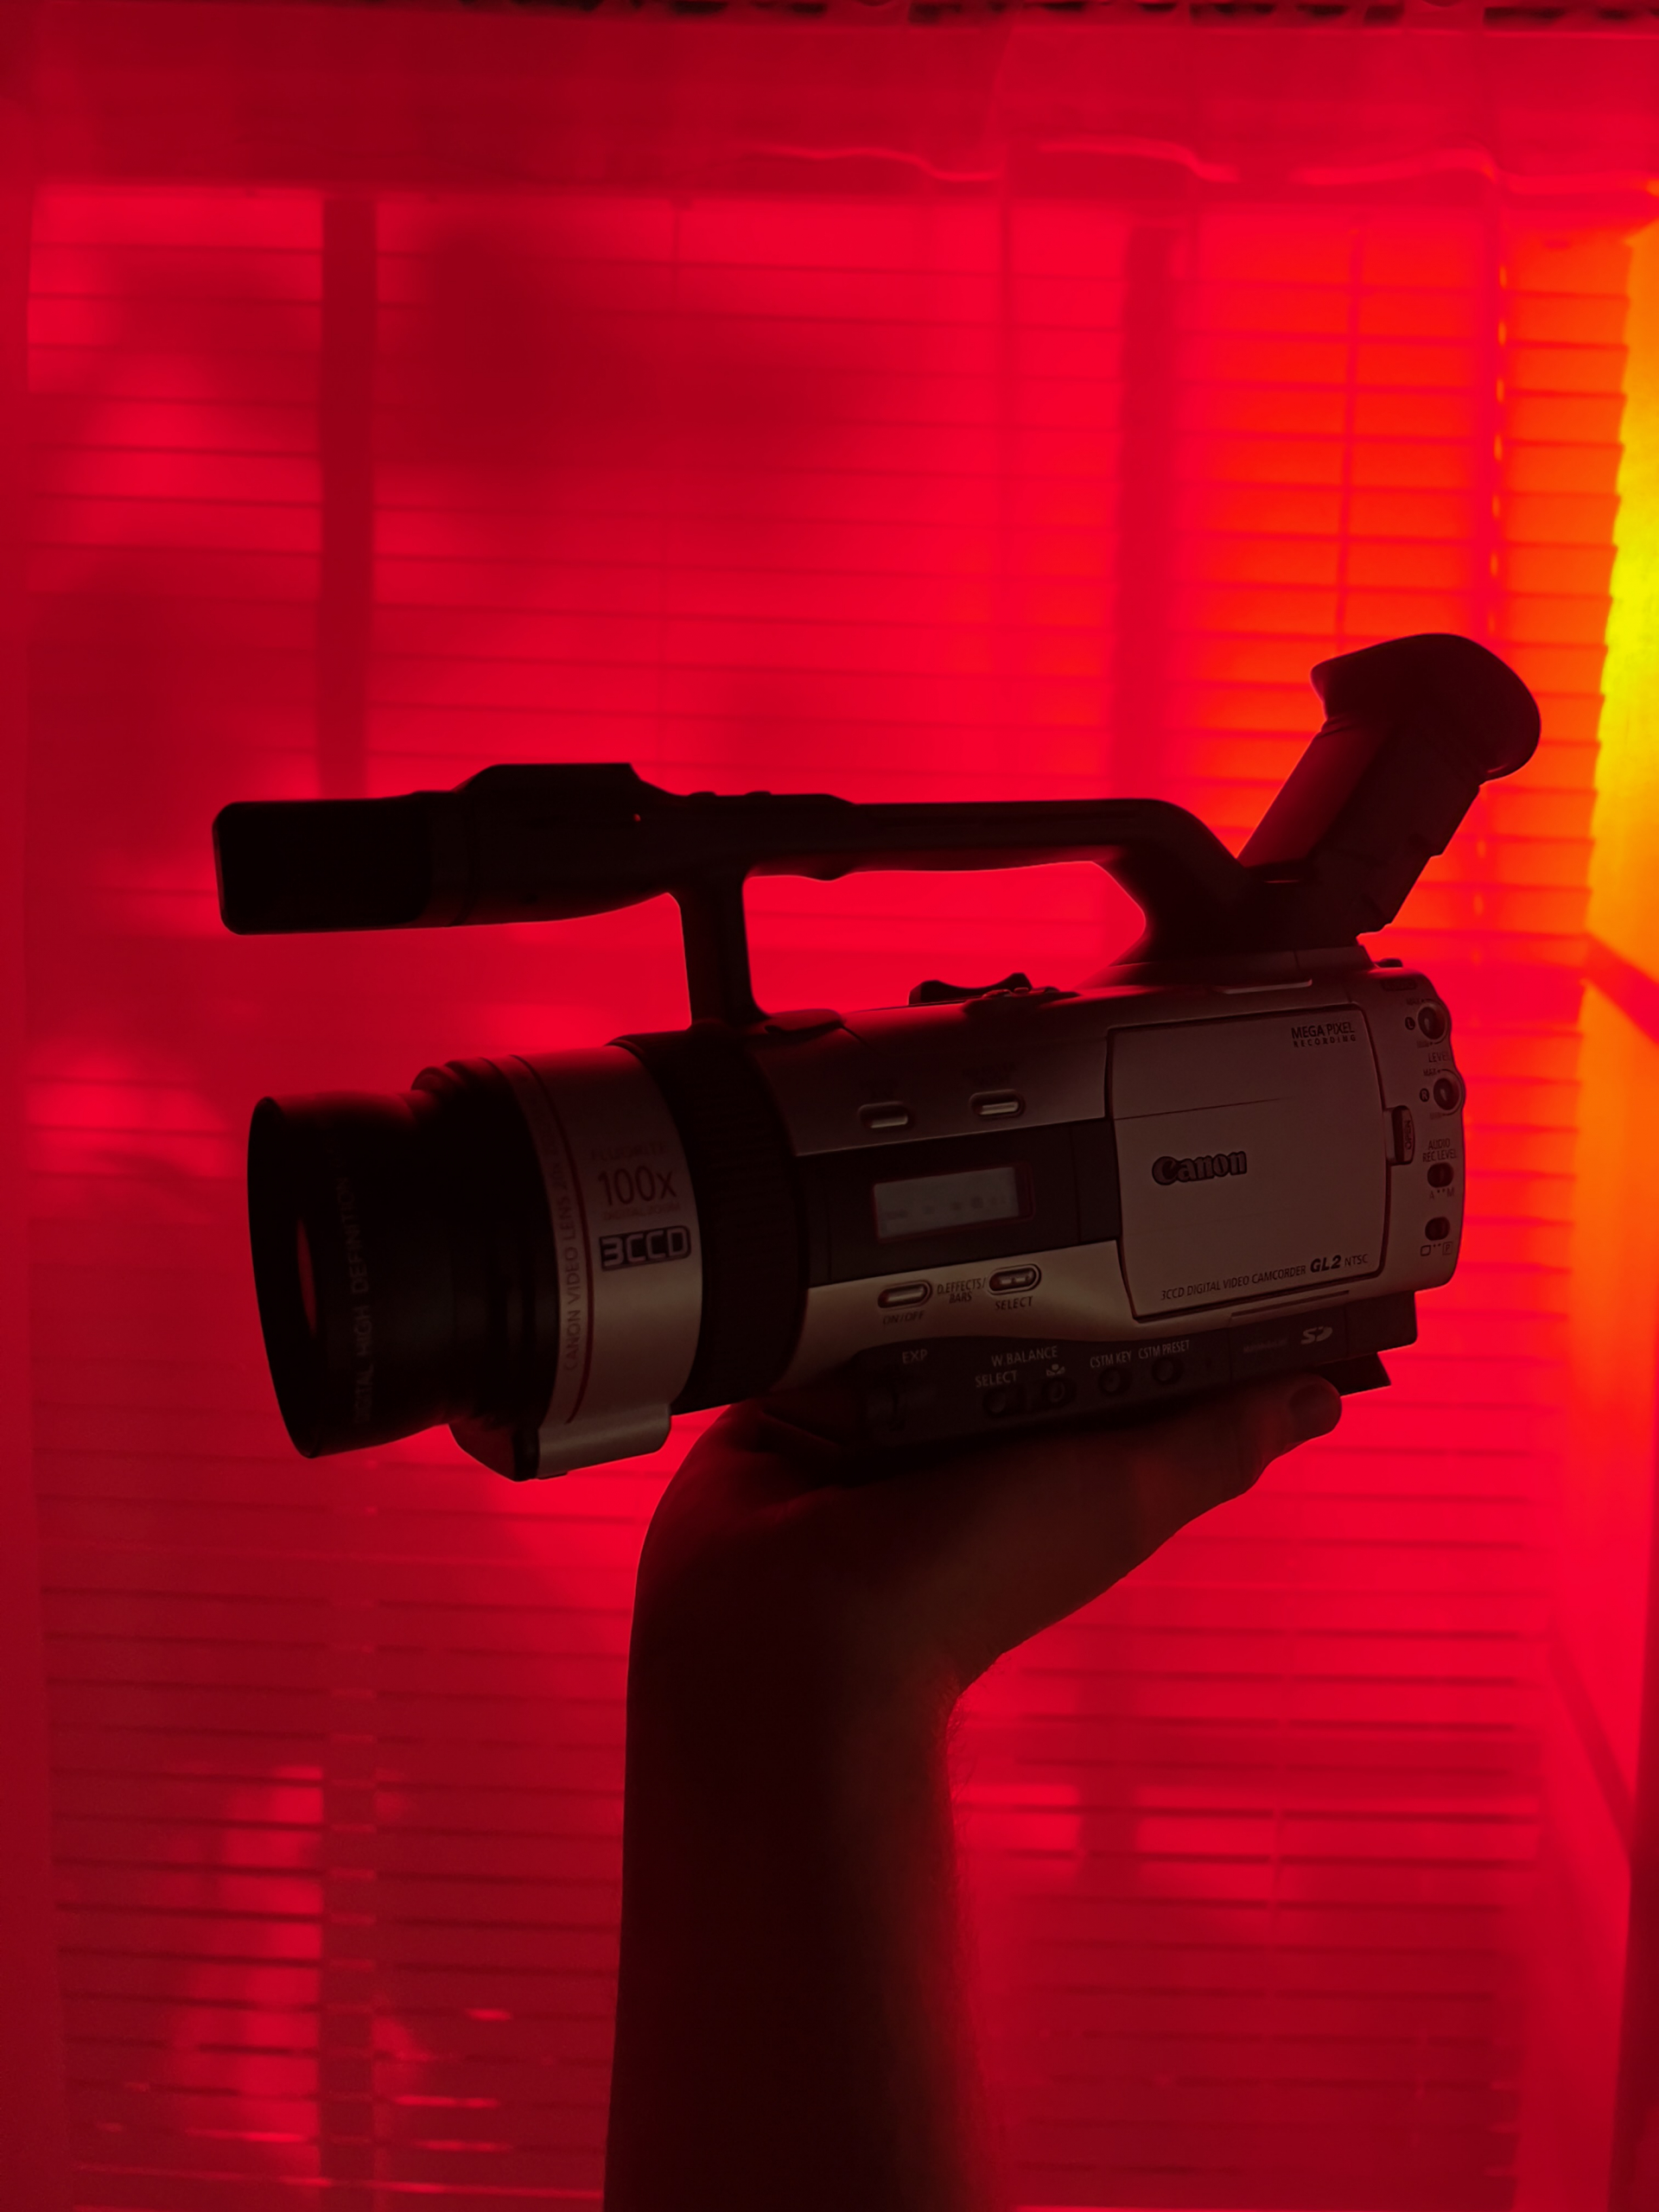 Canon GL2 held up against a curtain with red light